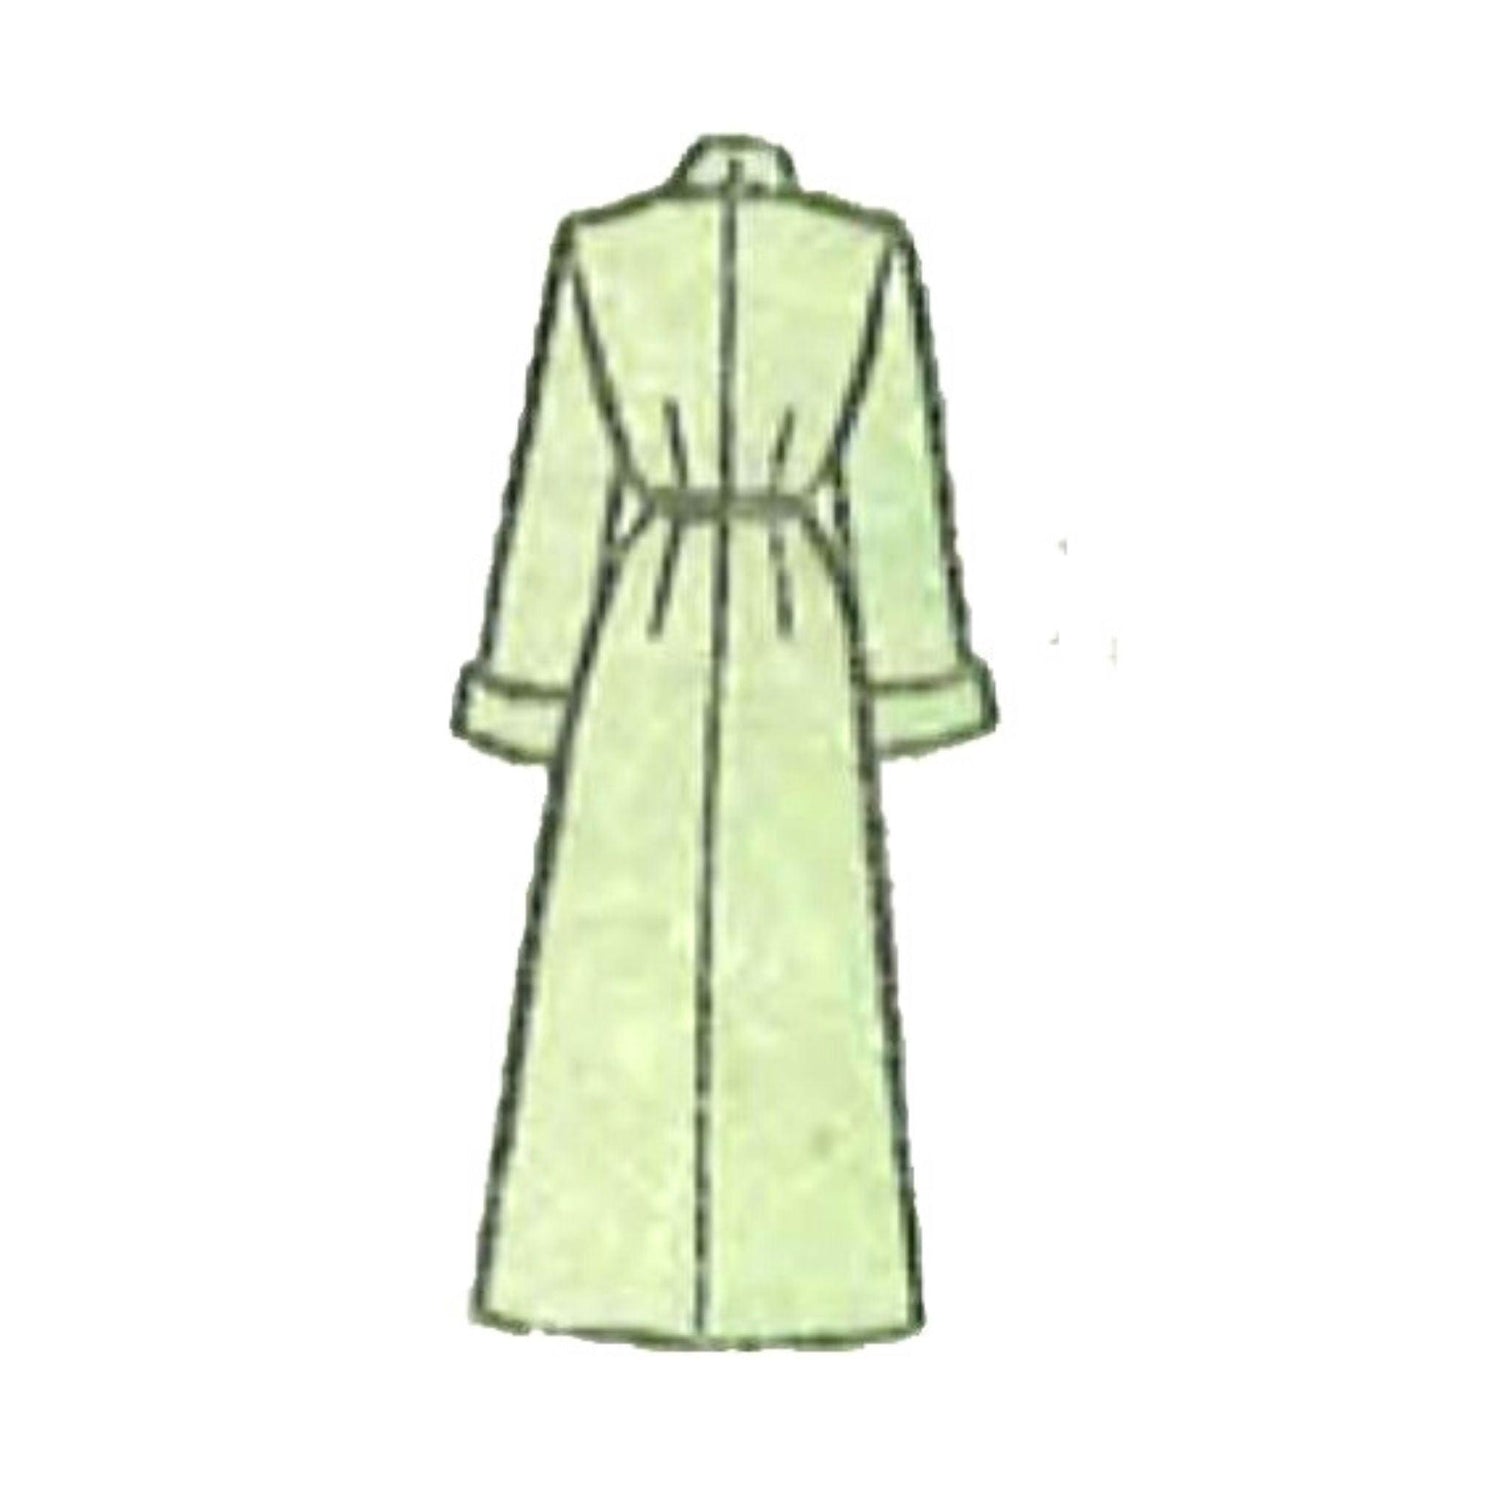 Vintage 1940s Pattern, Women's Dressing Gown Robe, Housecoat - Instantly Print at Home - Vintage Sewing Pattern Company